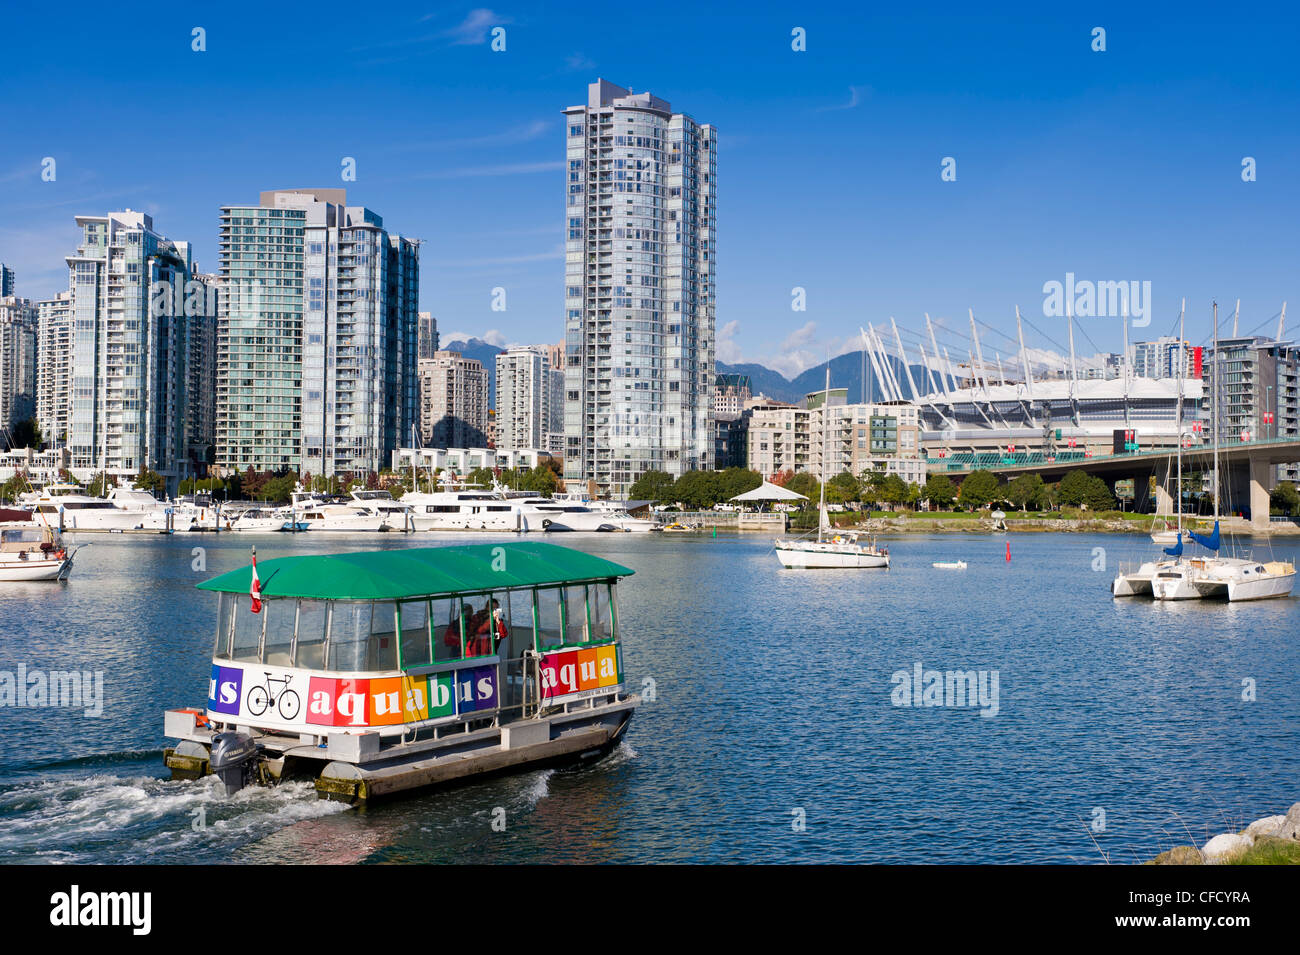 Aquabus Ferry, city skyline with new retractable roof on BC Place Stadium, False Creek, Vancouver, British Columbia, Canada Stock Photo